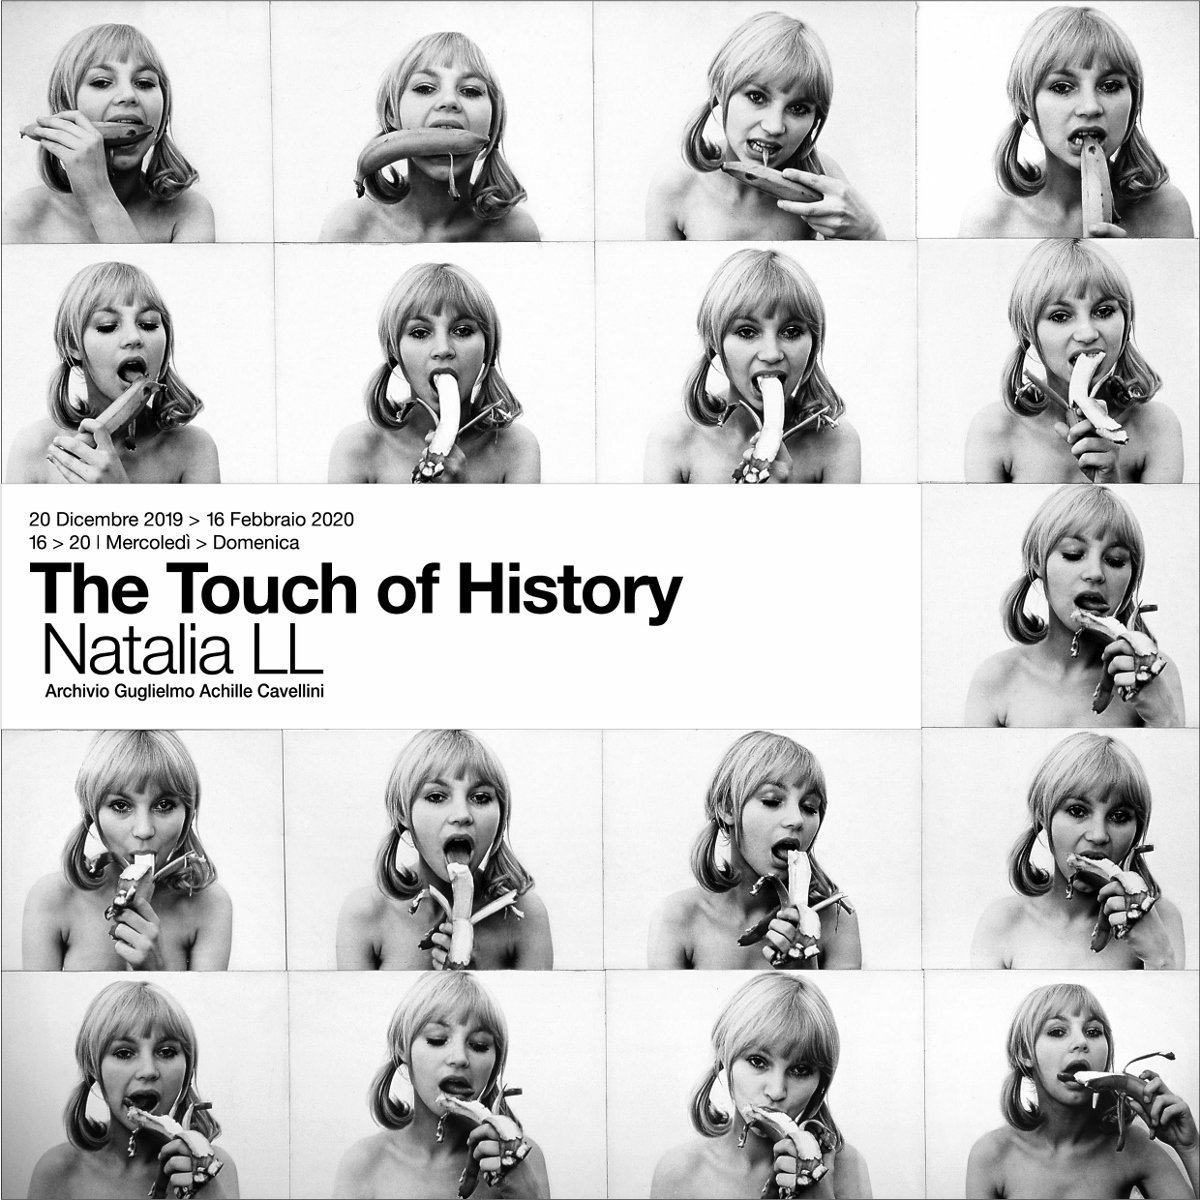 Natalia LL – The Touch of History